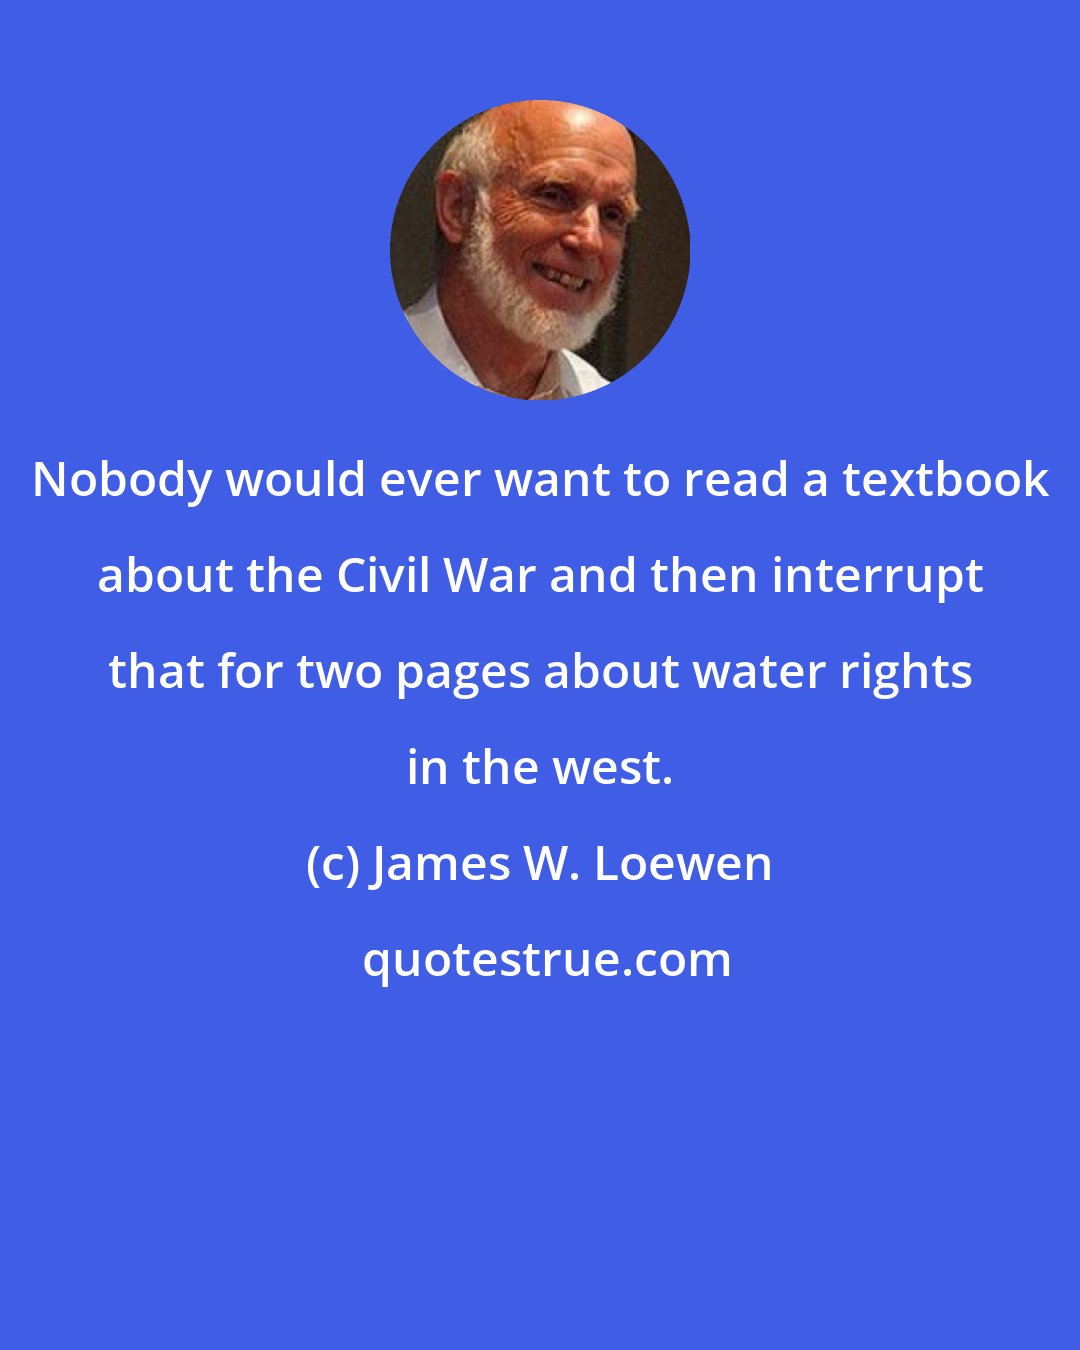 James W. Loewen: Nobody would ever want to read a textbook about the Civil War and then interrupt that for two pages about water rights in the west.